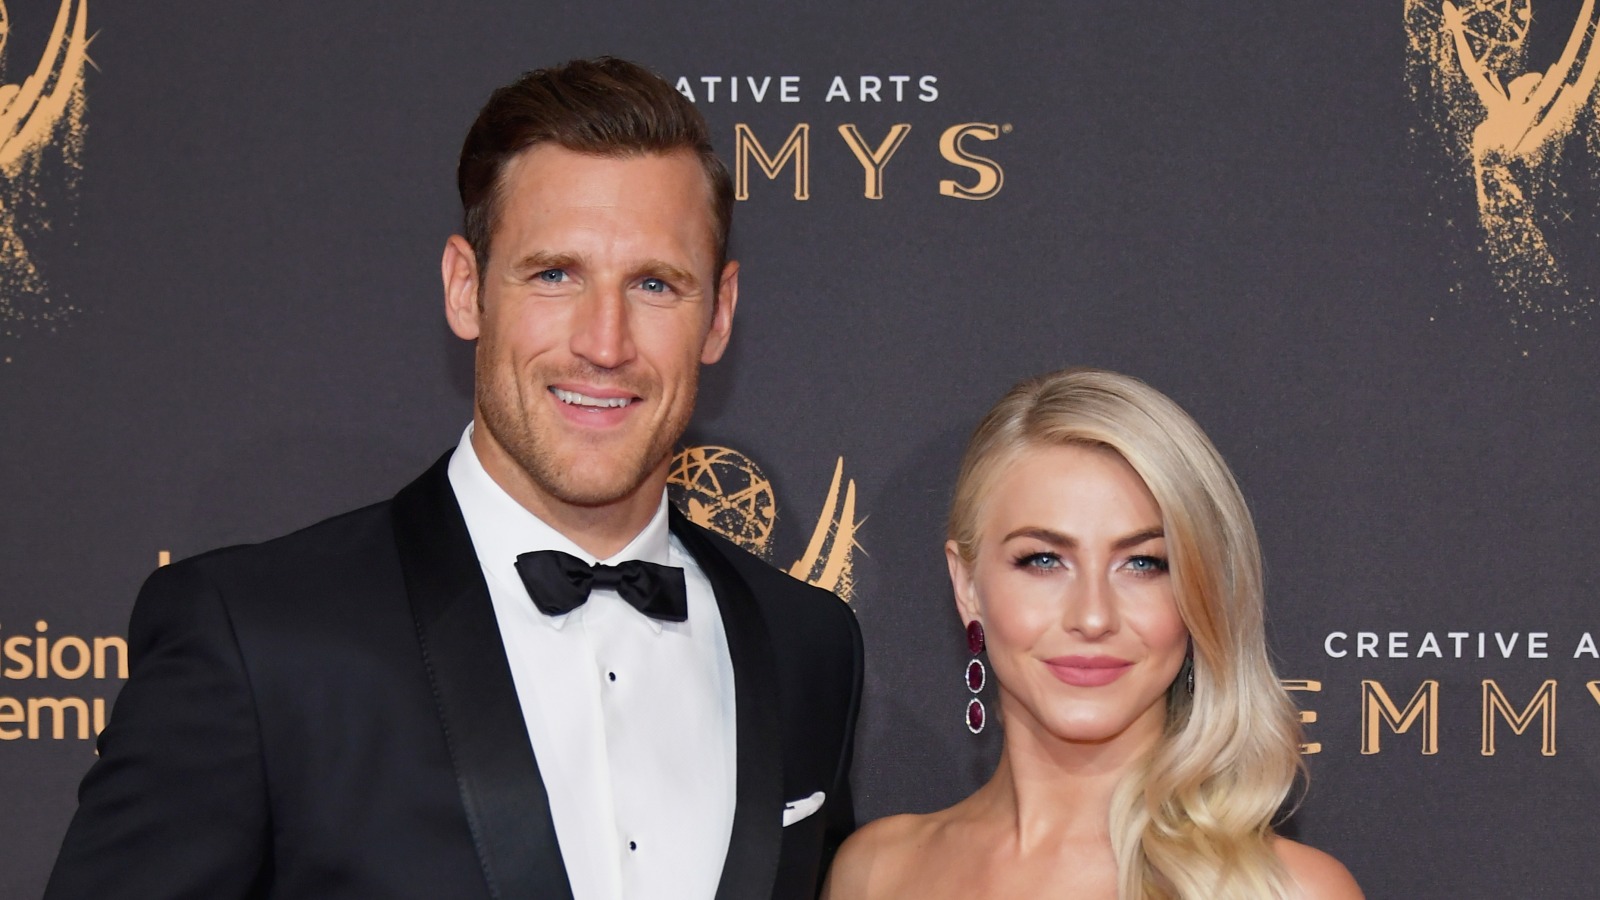 The Truth About Julianne Hough And Brooks Laich's Relationship